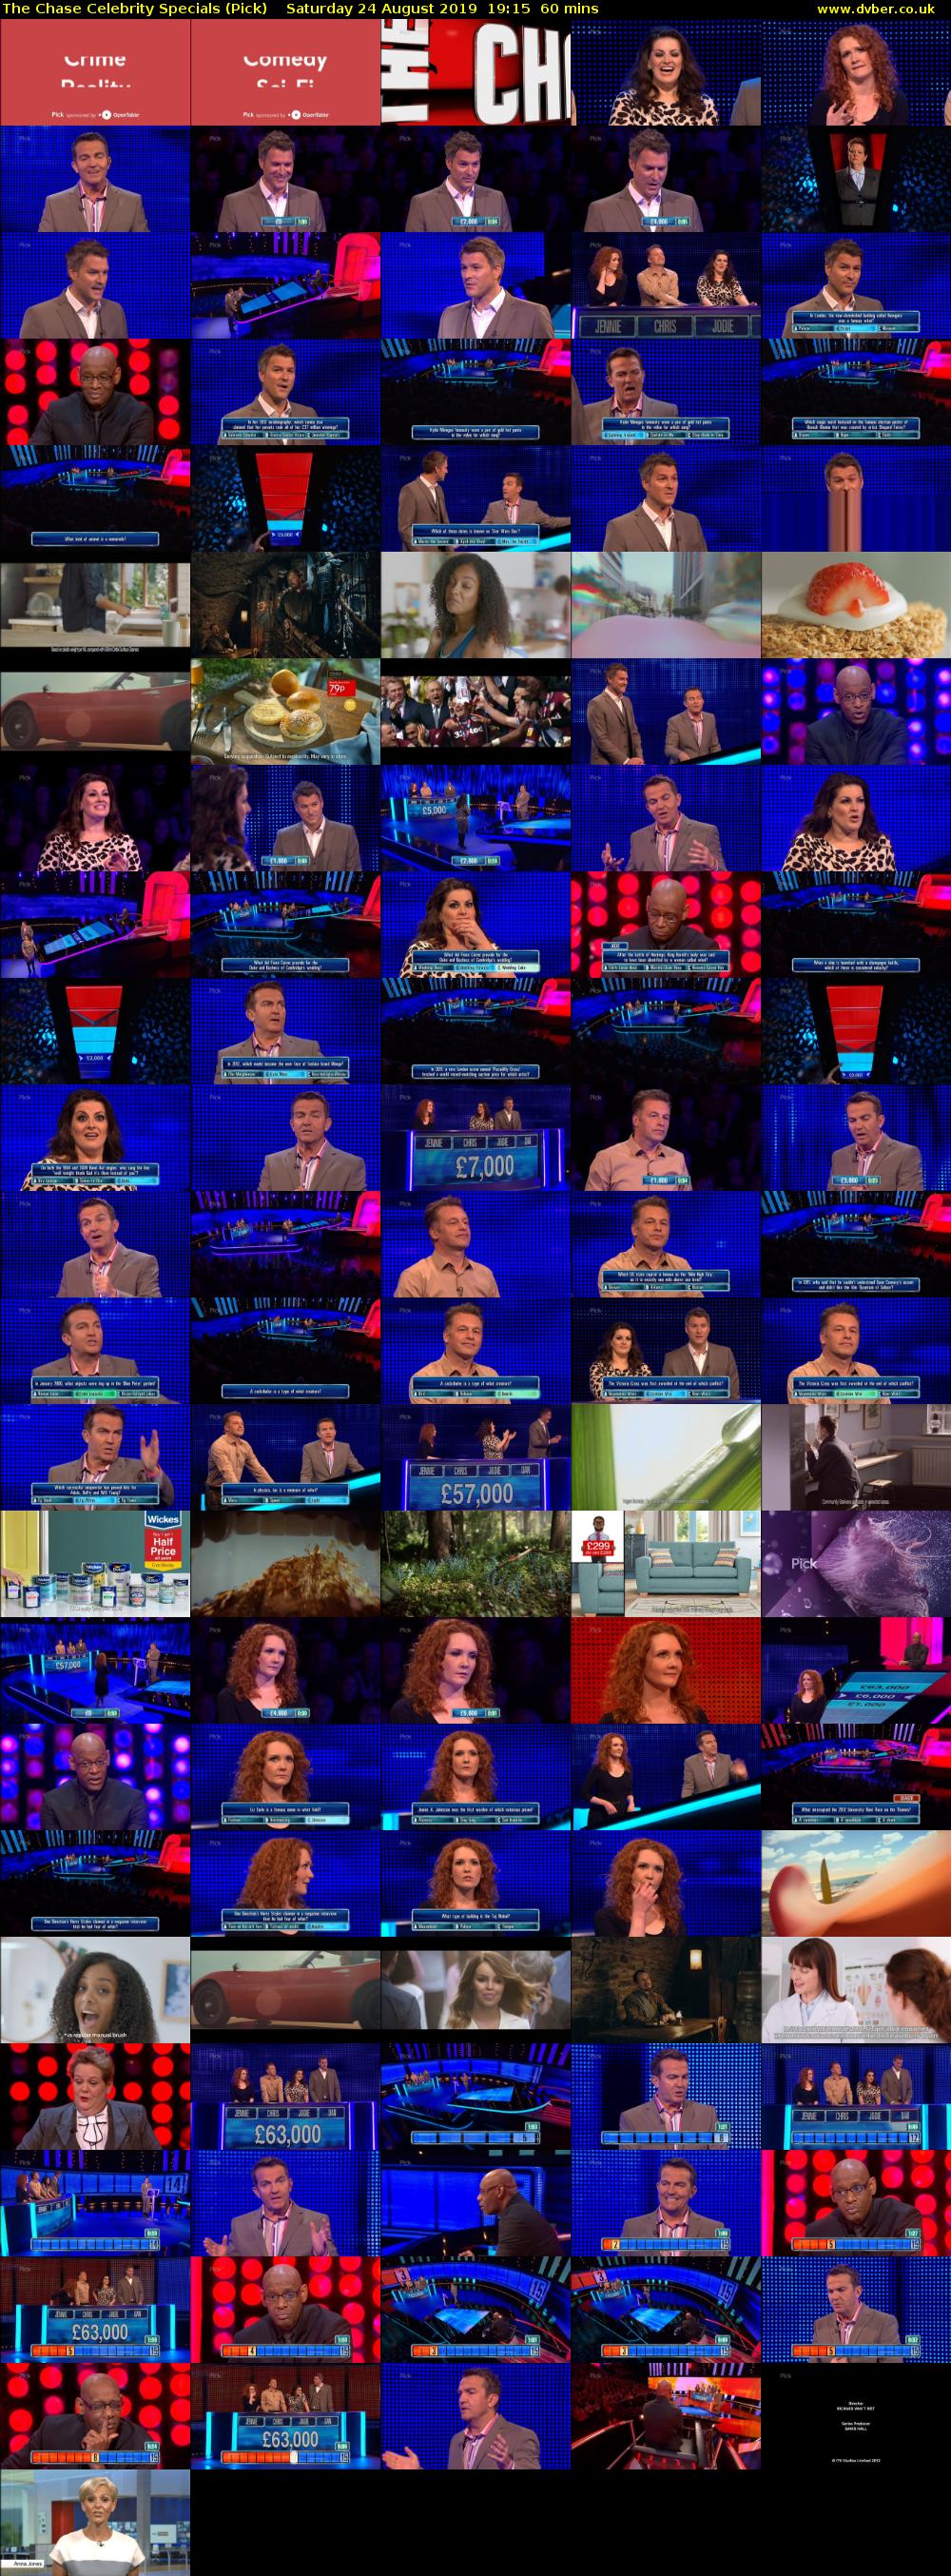 The Chase Celebrity Specials (Pick) Saturday 24 August 2019 19:15 - 20:15